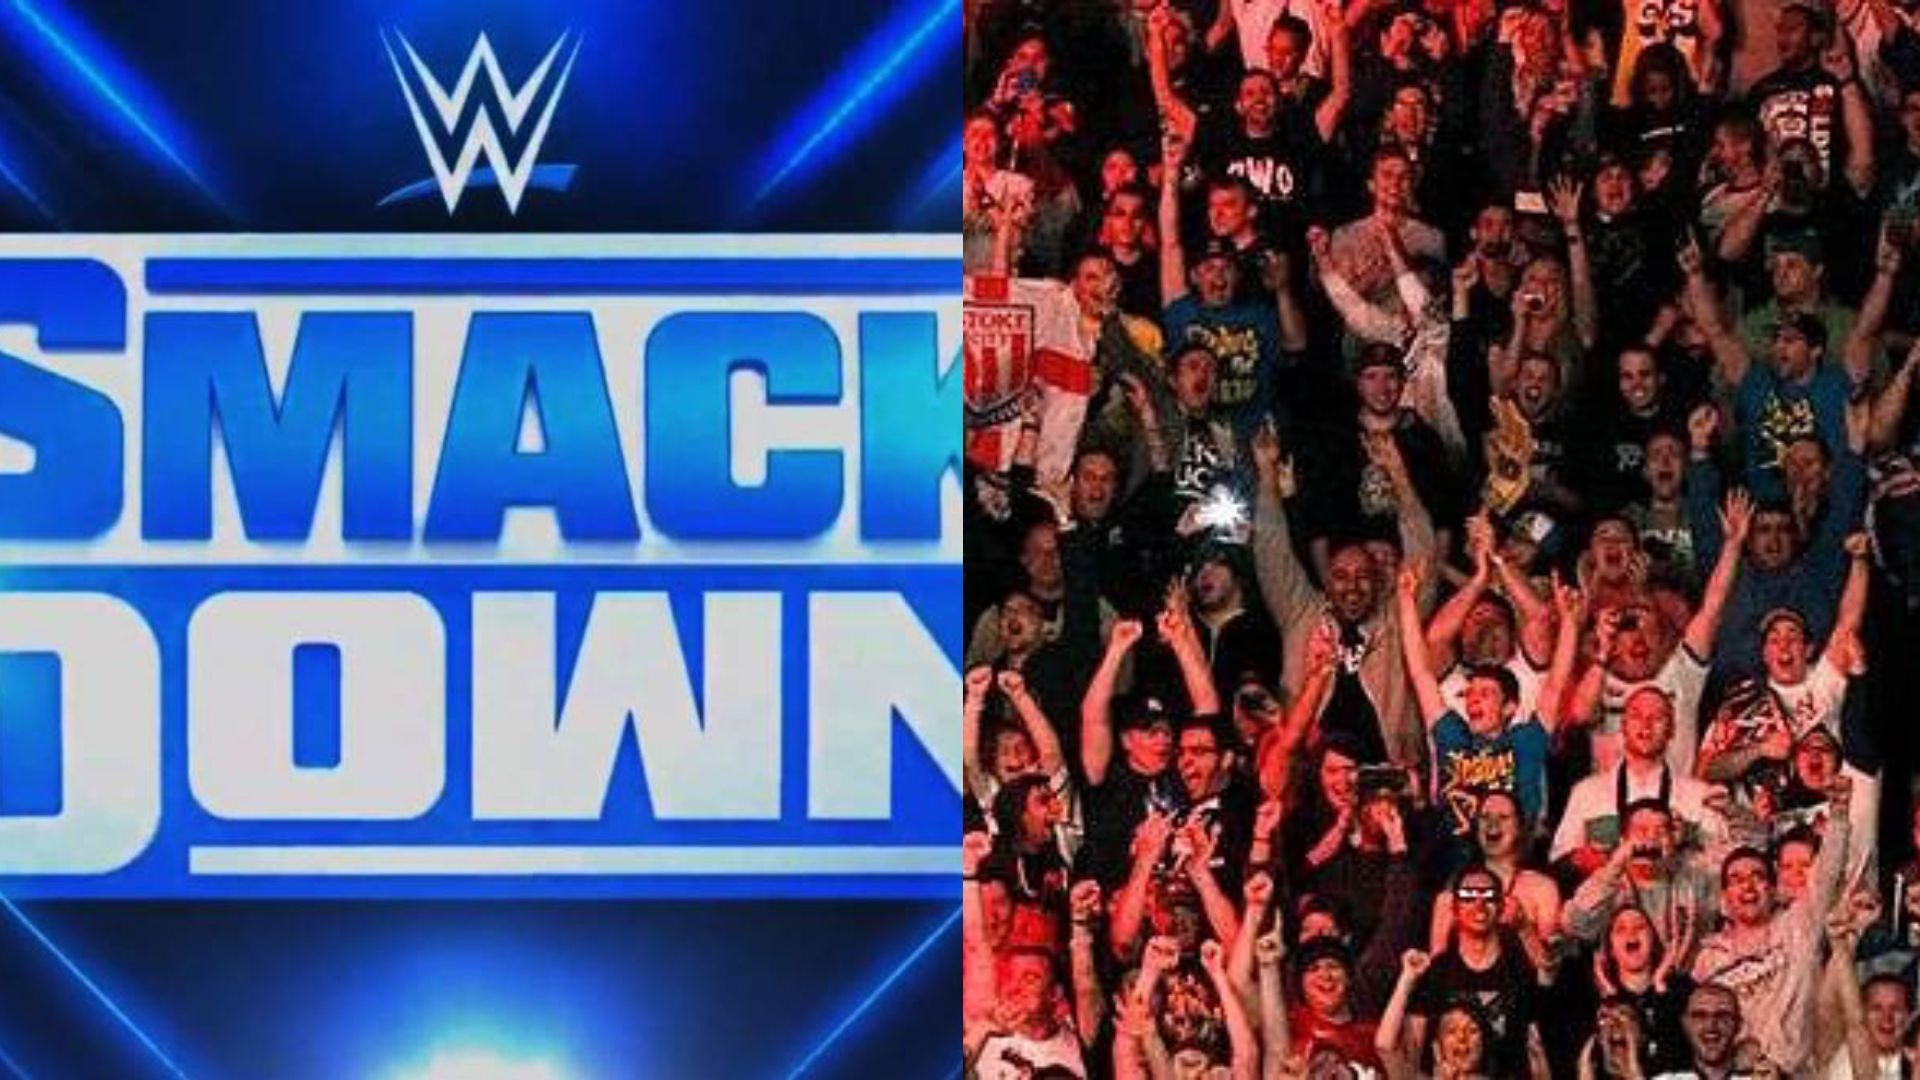 WWE hinted at a new feud on Smackdown